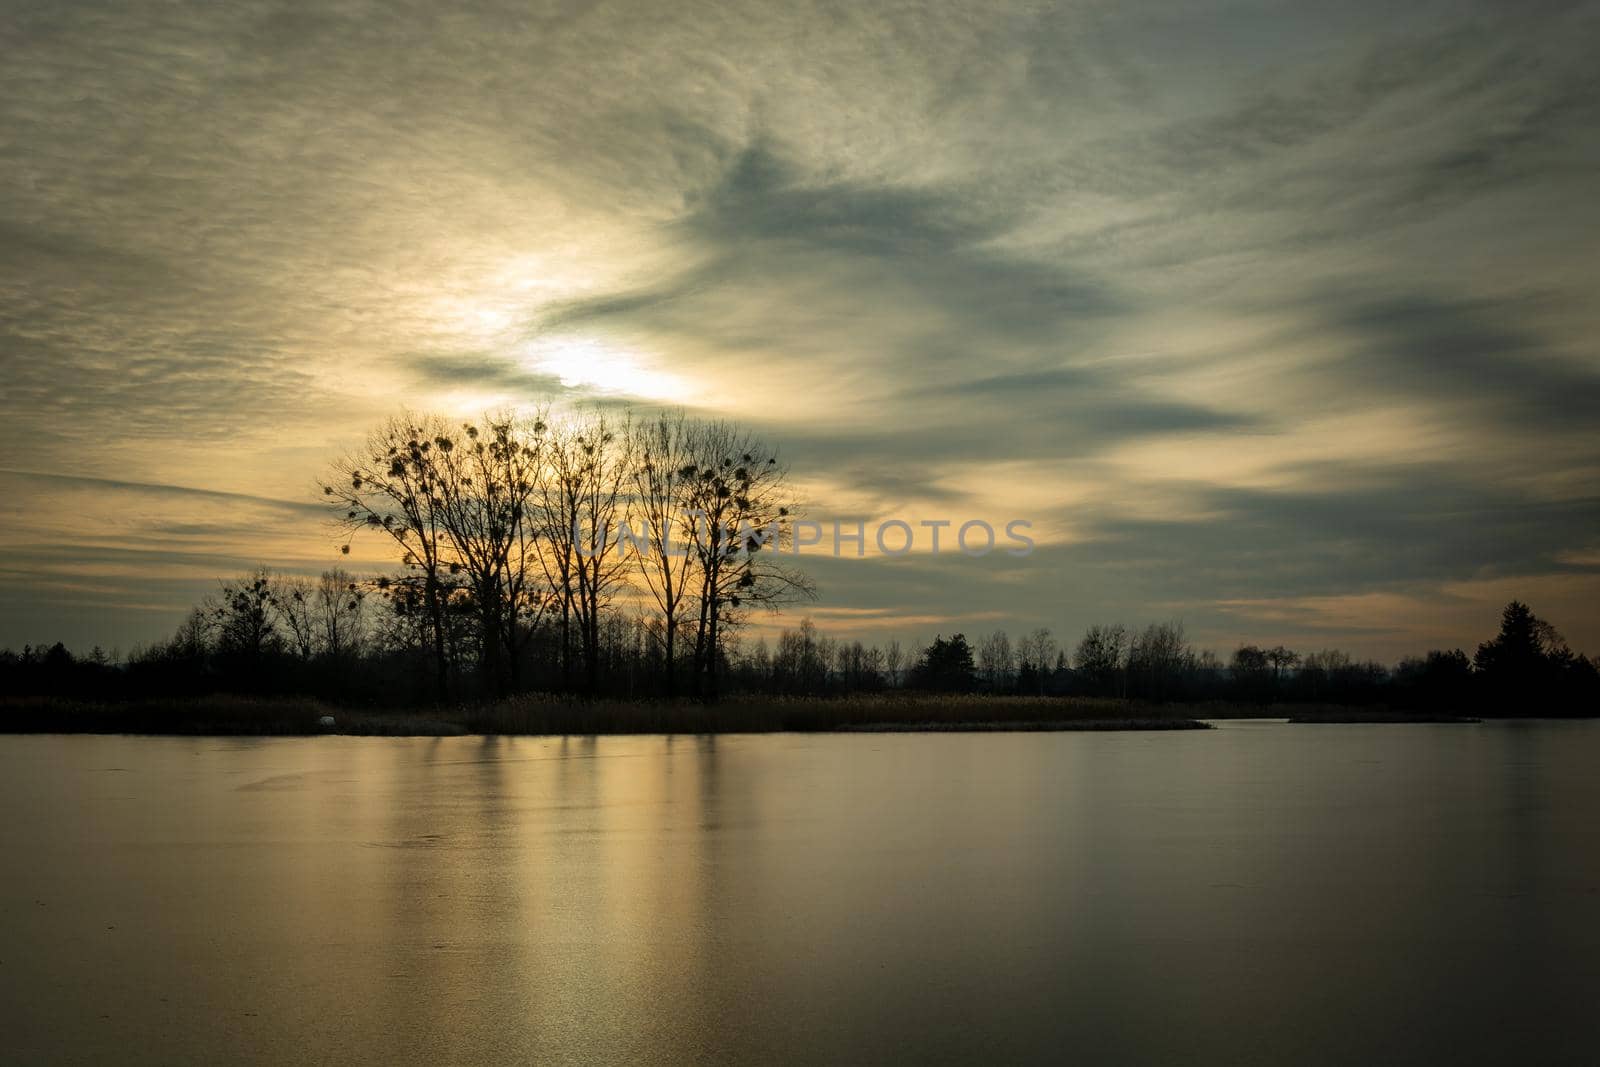 The sun behind the clouds over the frozen lake and trees on the shore by darekb22